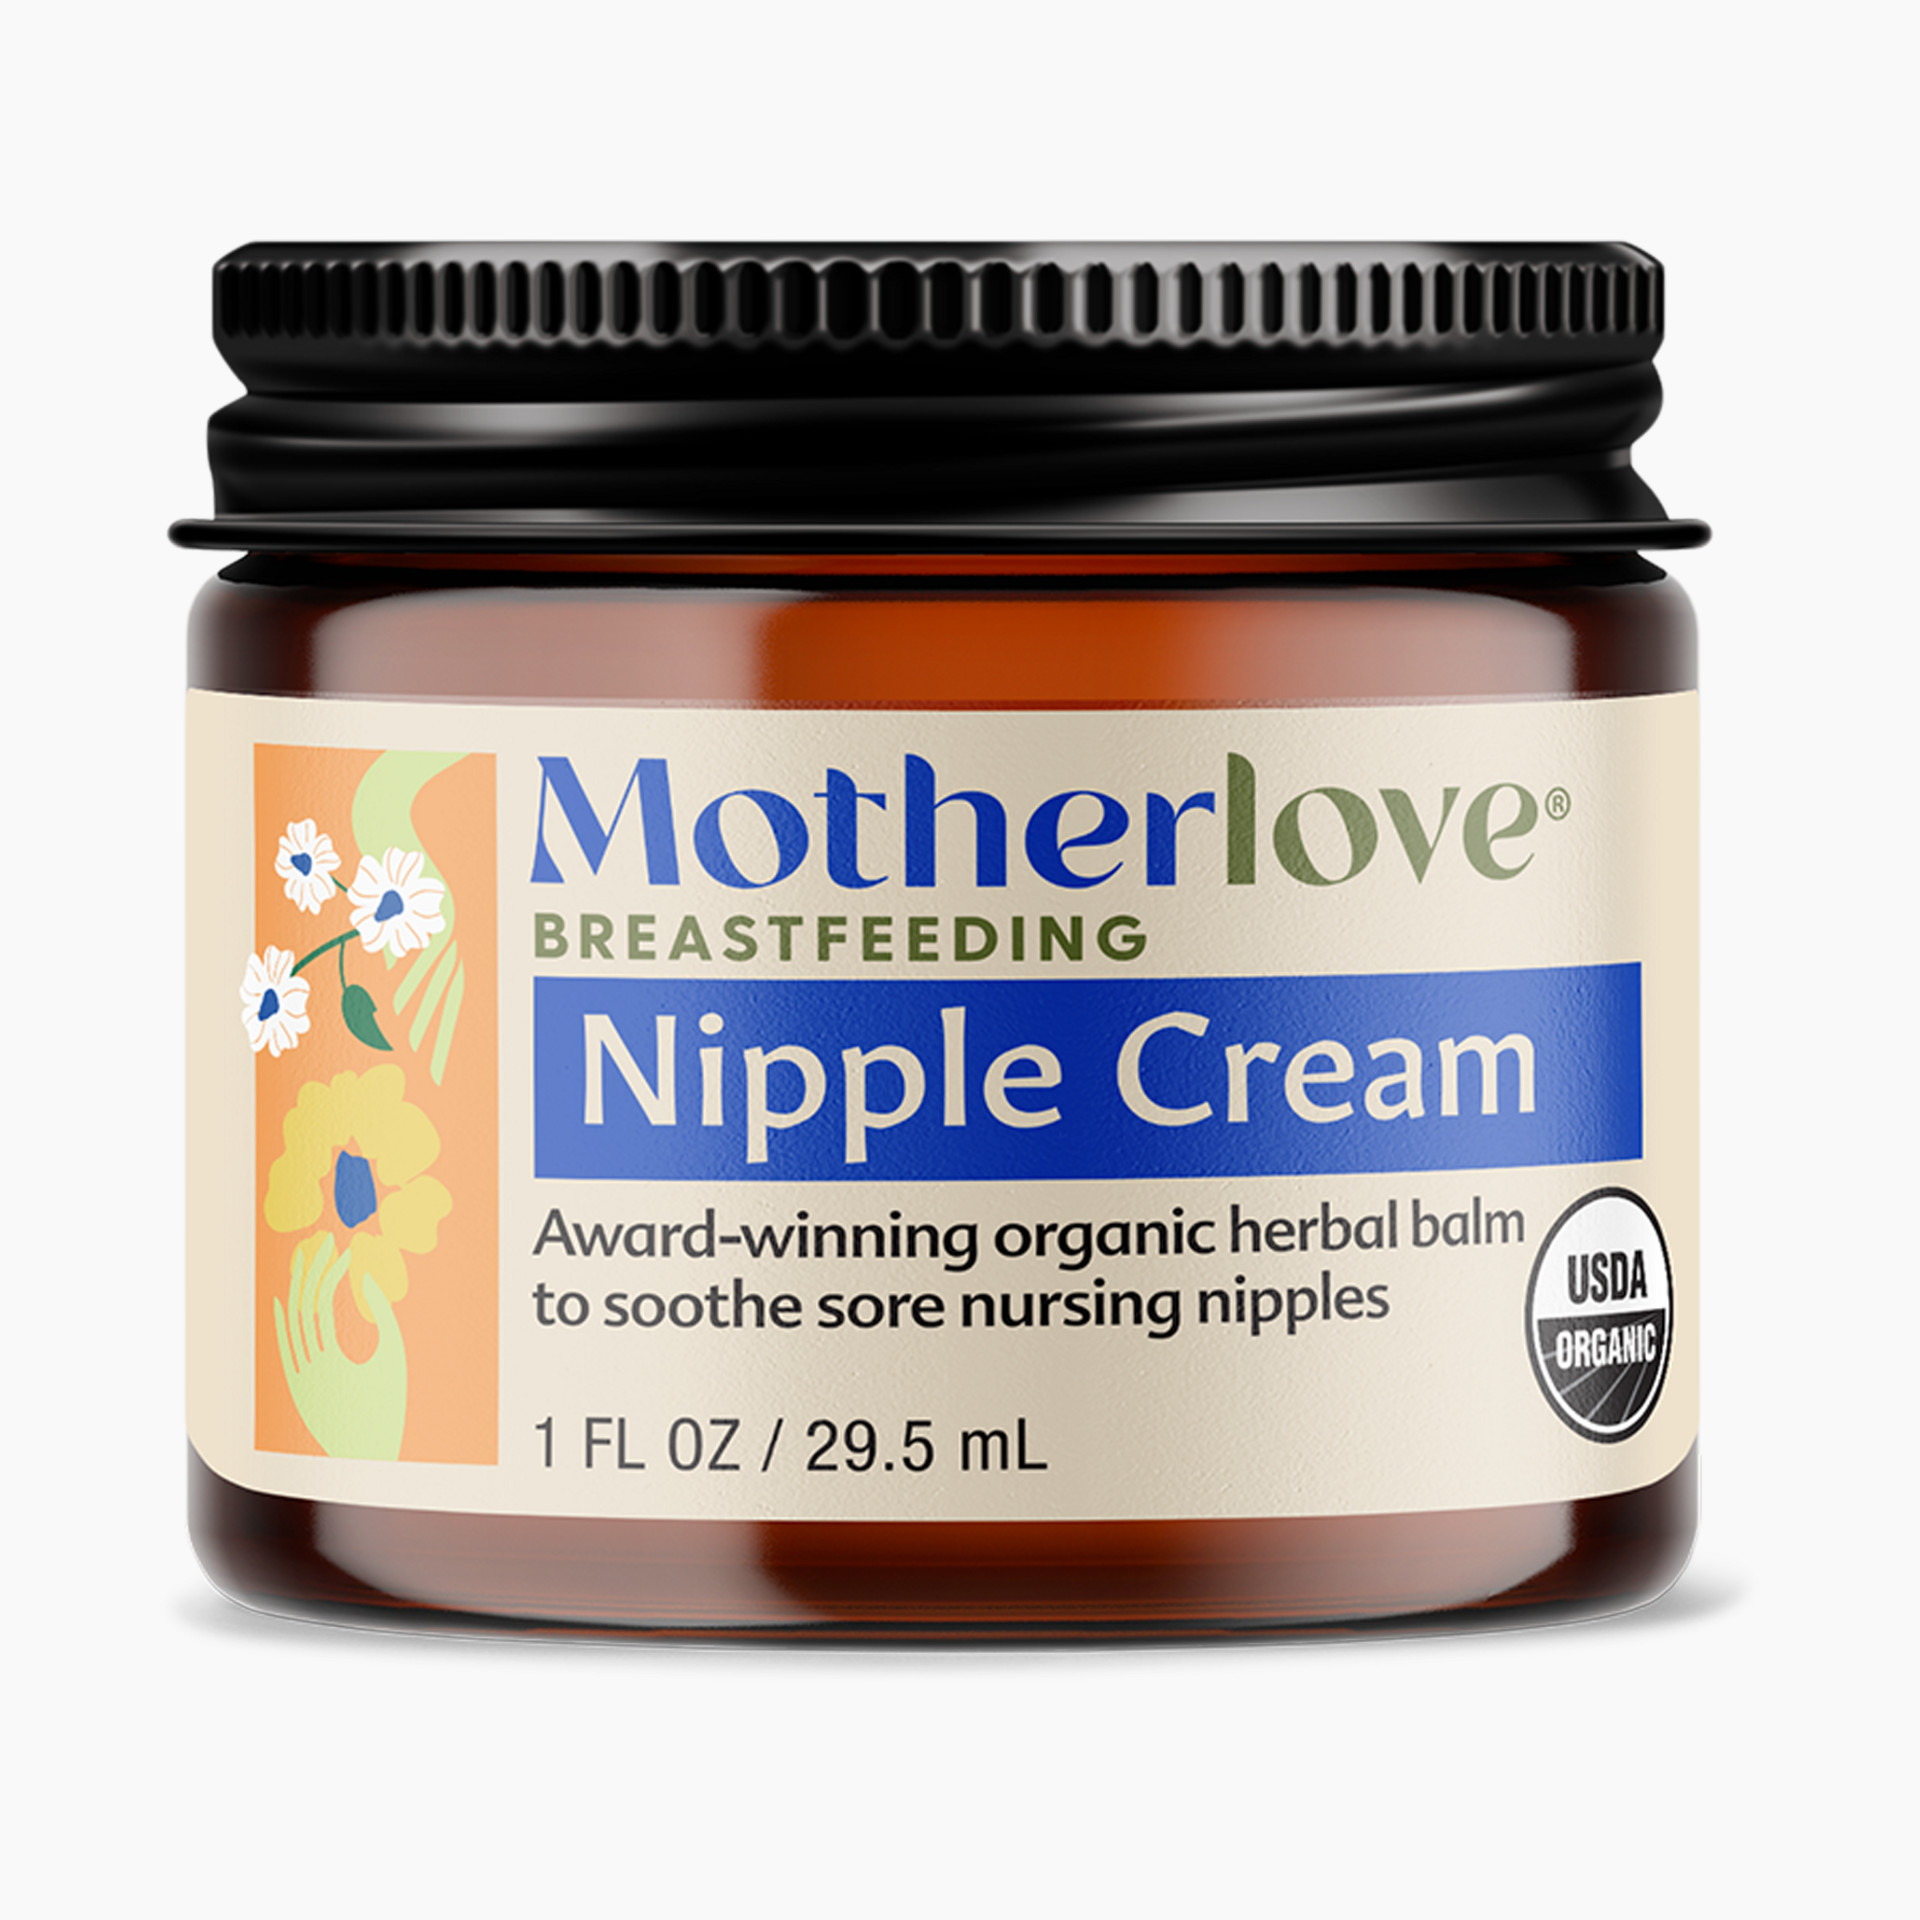 Organic Natural Nipple Butter, 2 fl oz at Whole Foods Market